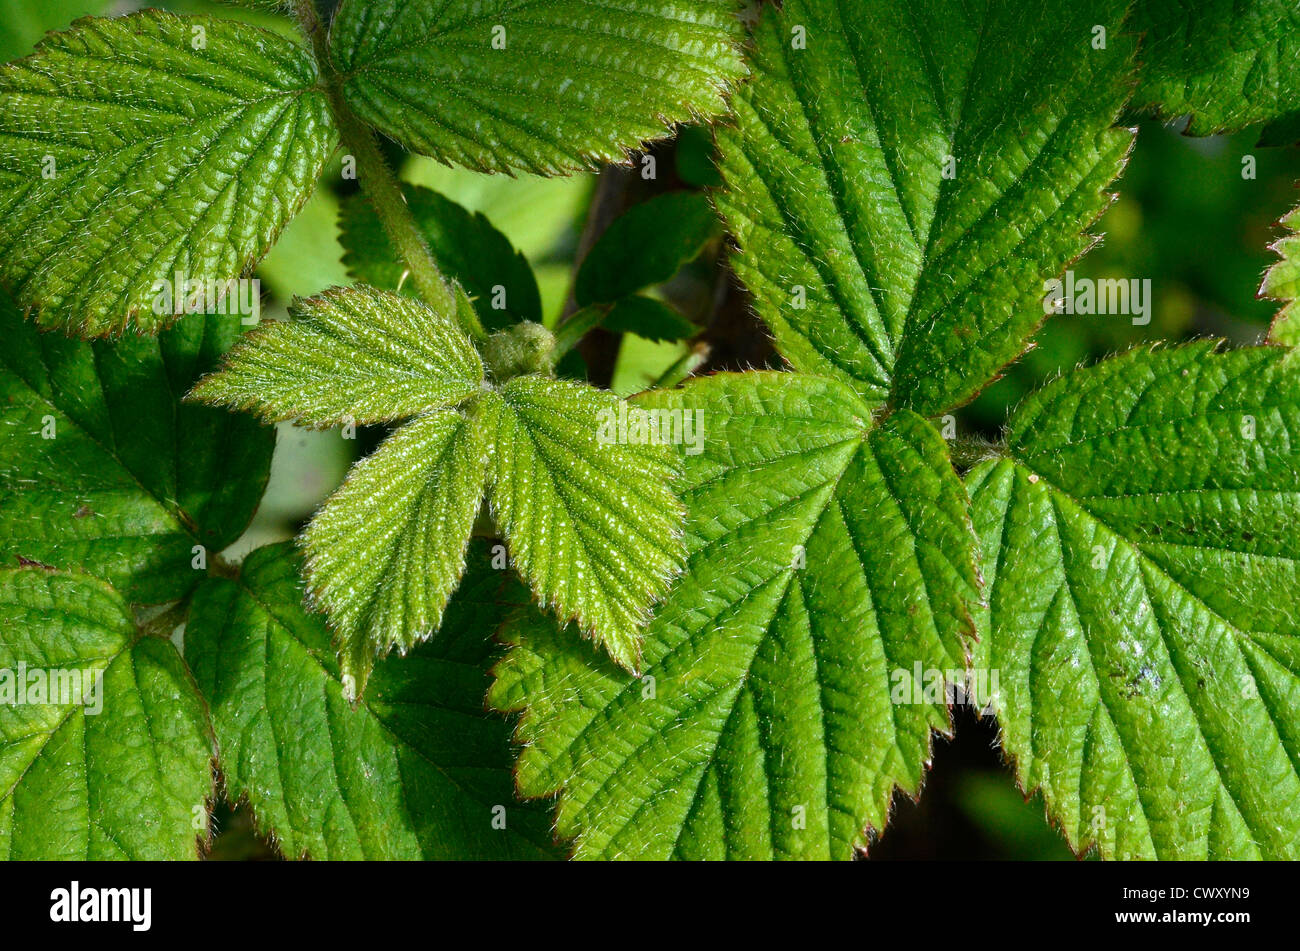 Leaves / foliage of Bramble / Rubus fruticosus agg. Medicinal plant once used for herbal remedies, while familiar Blackberry fruits used as food. Stock Photo